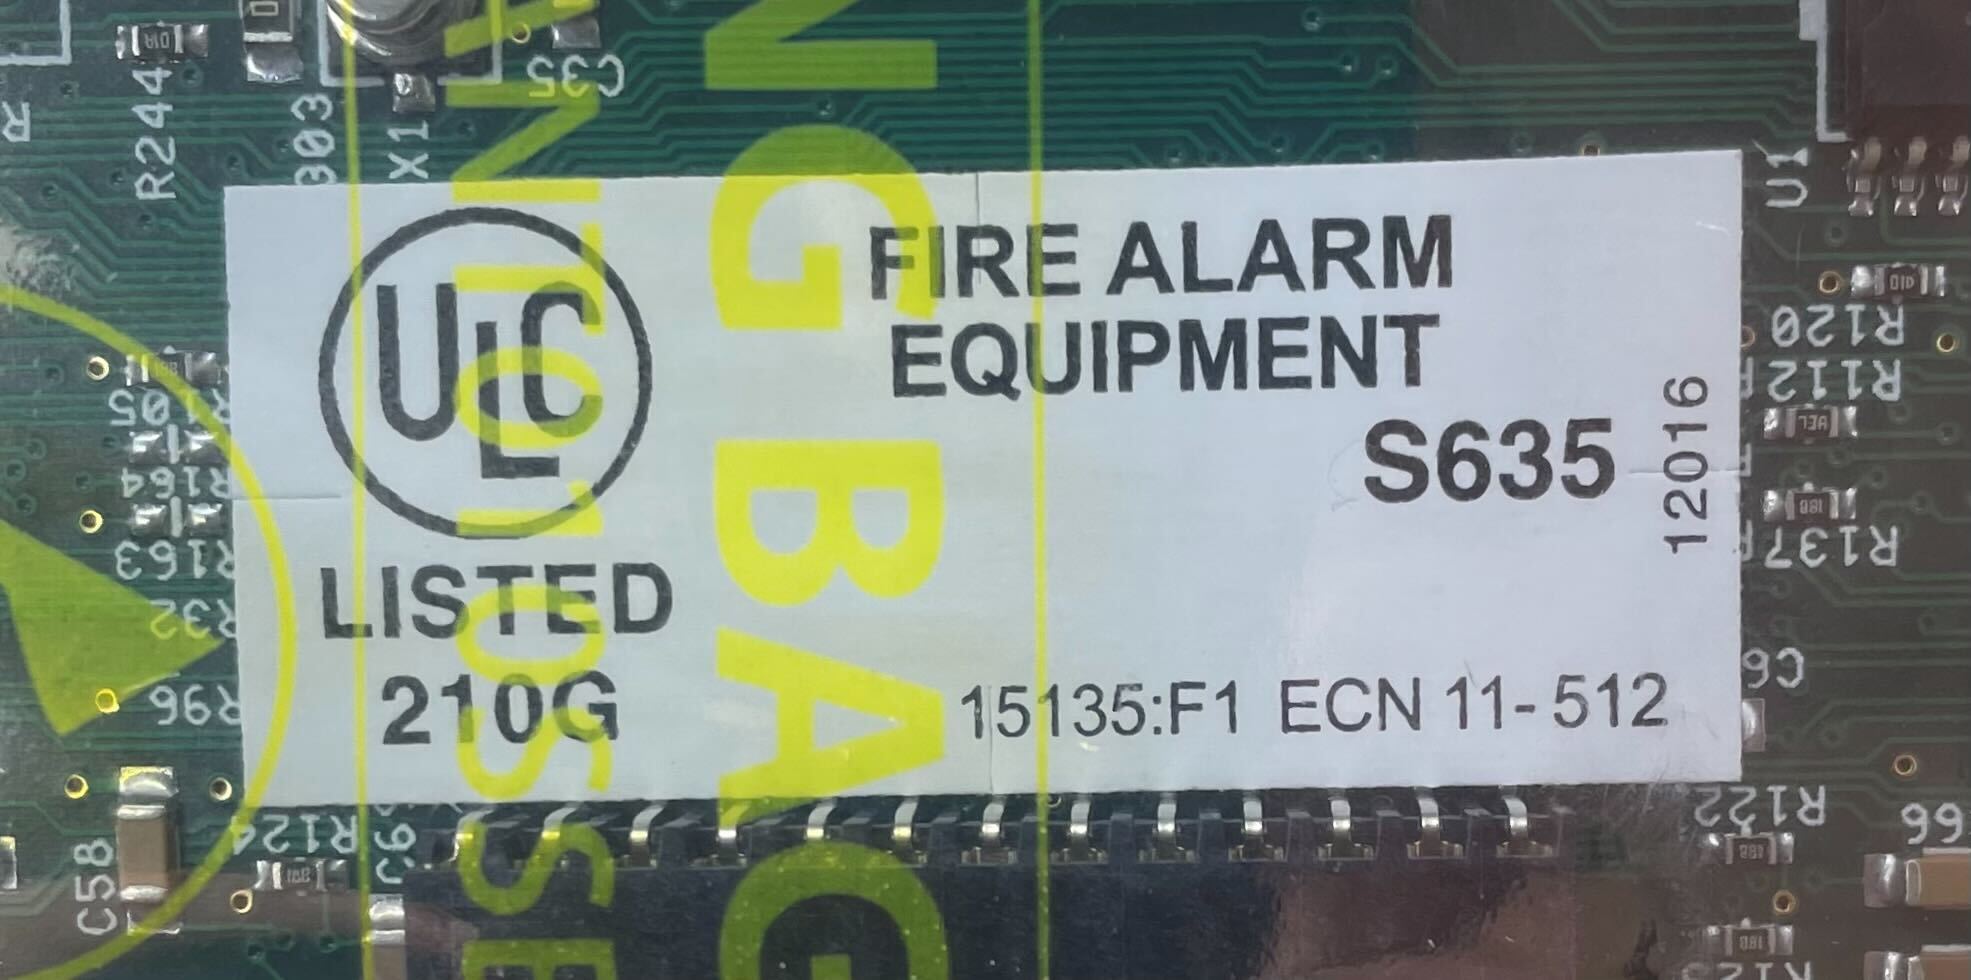 Notifier ACM-24AT - The Fire Alarm Supplier